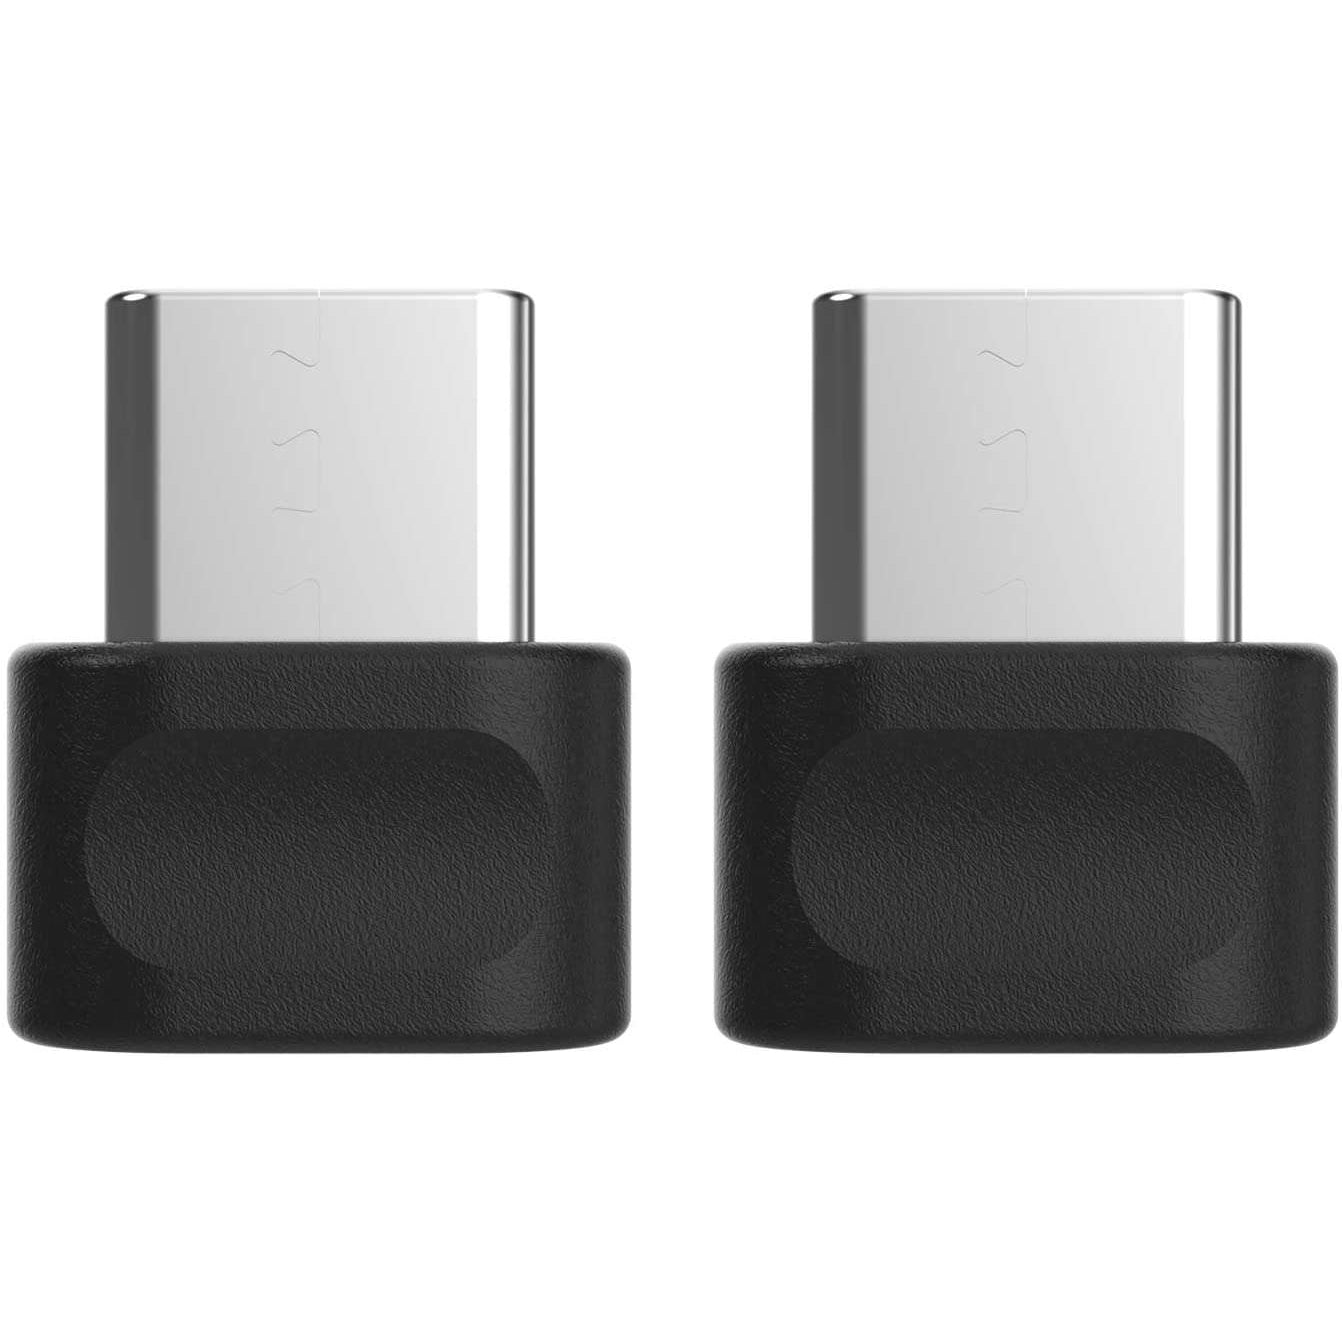 2-Pack USB Type C dongle replacements designed for PS5 controller charging stations.